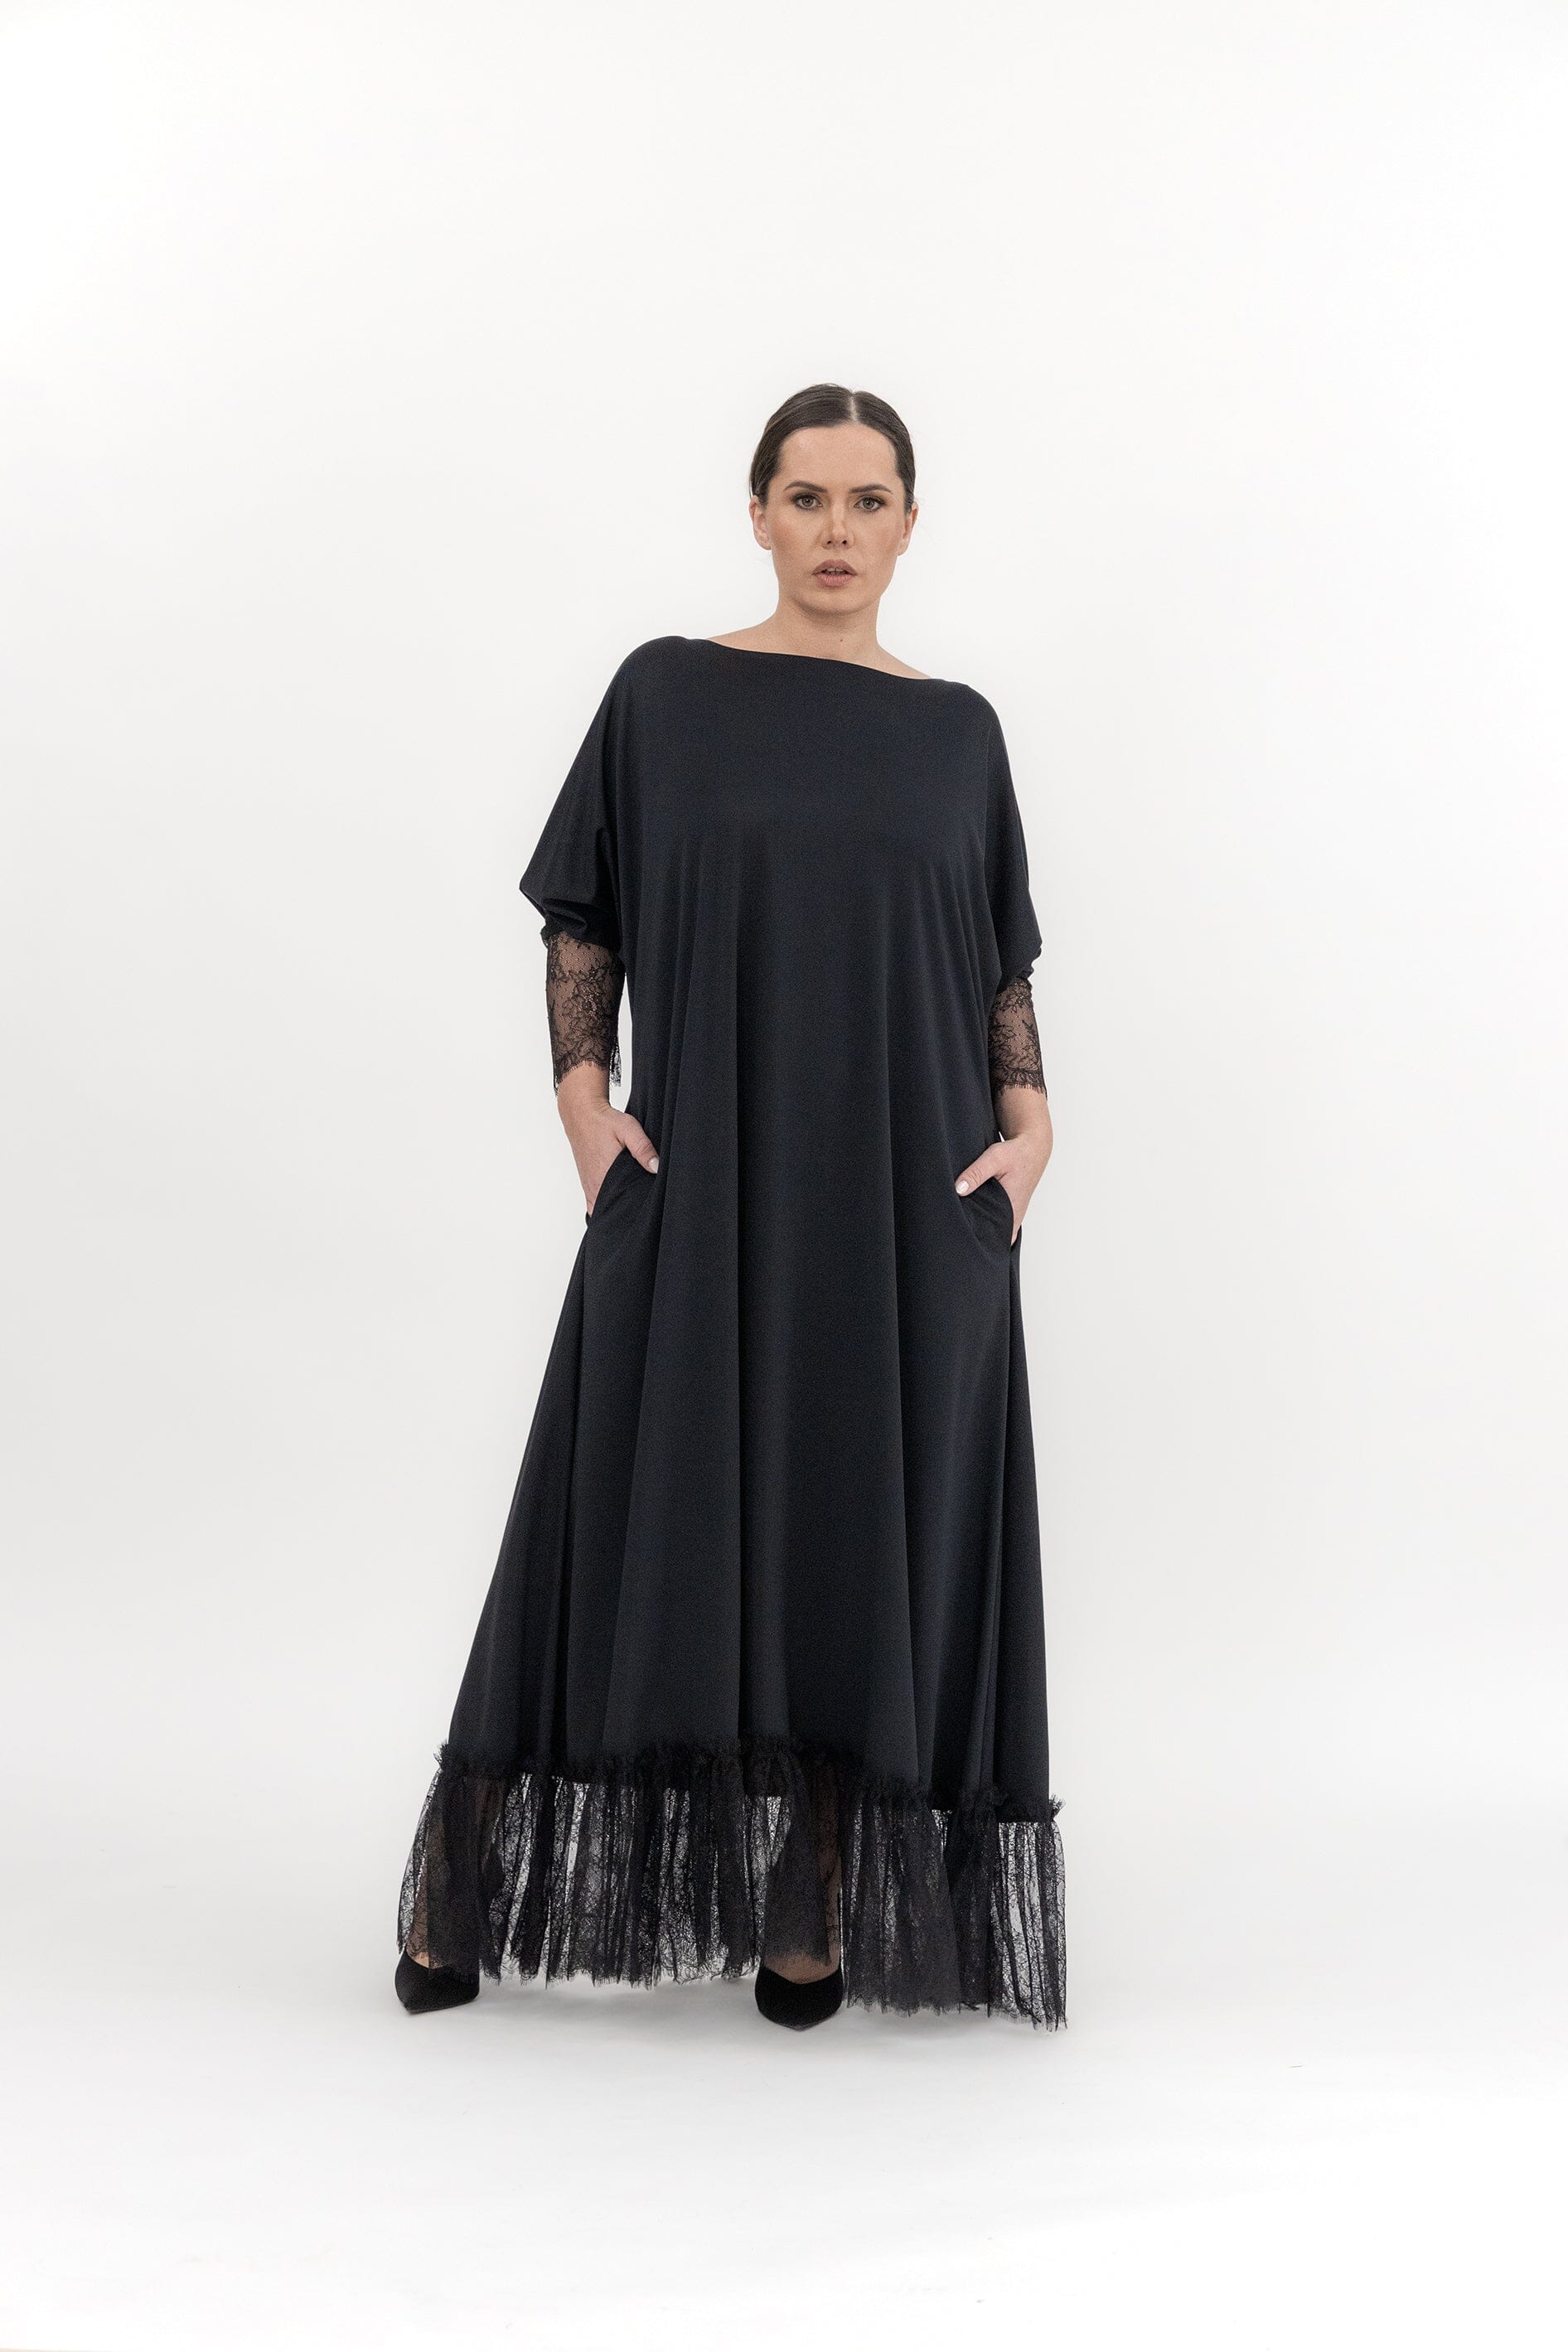  High On Love Dress Black Product Amoralle